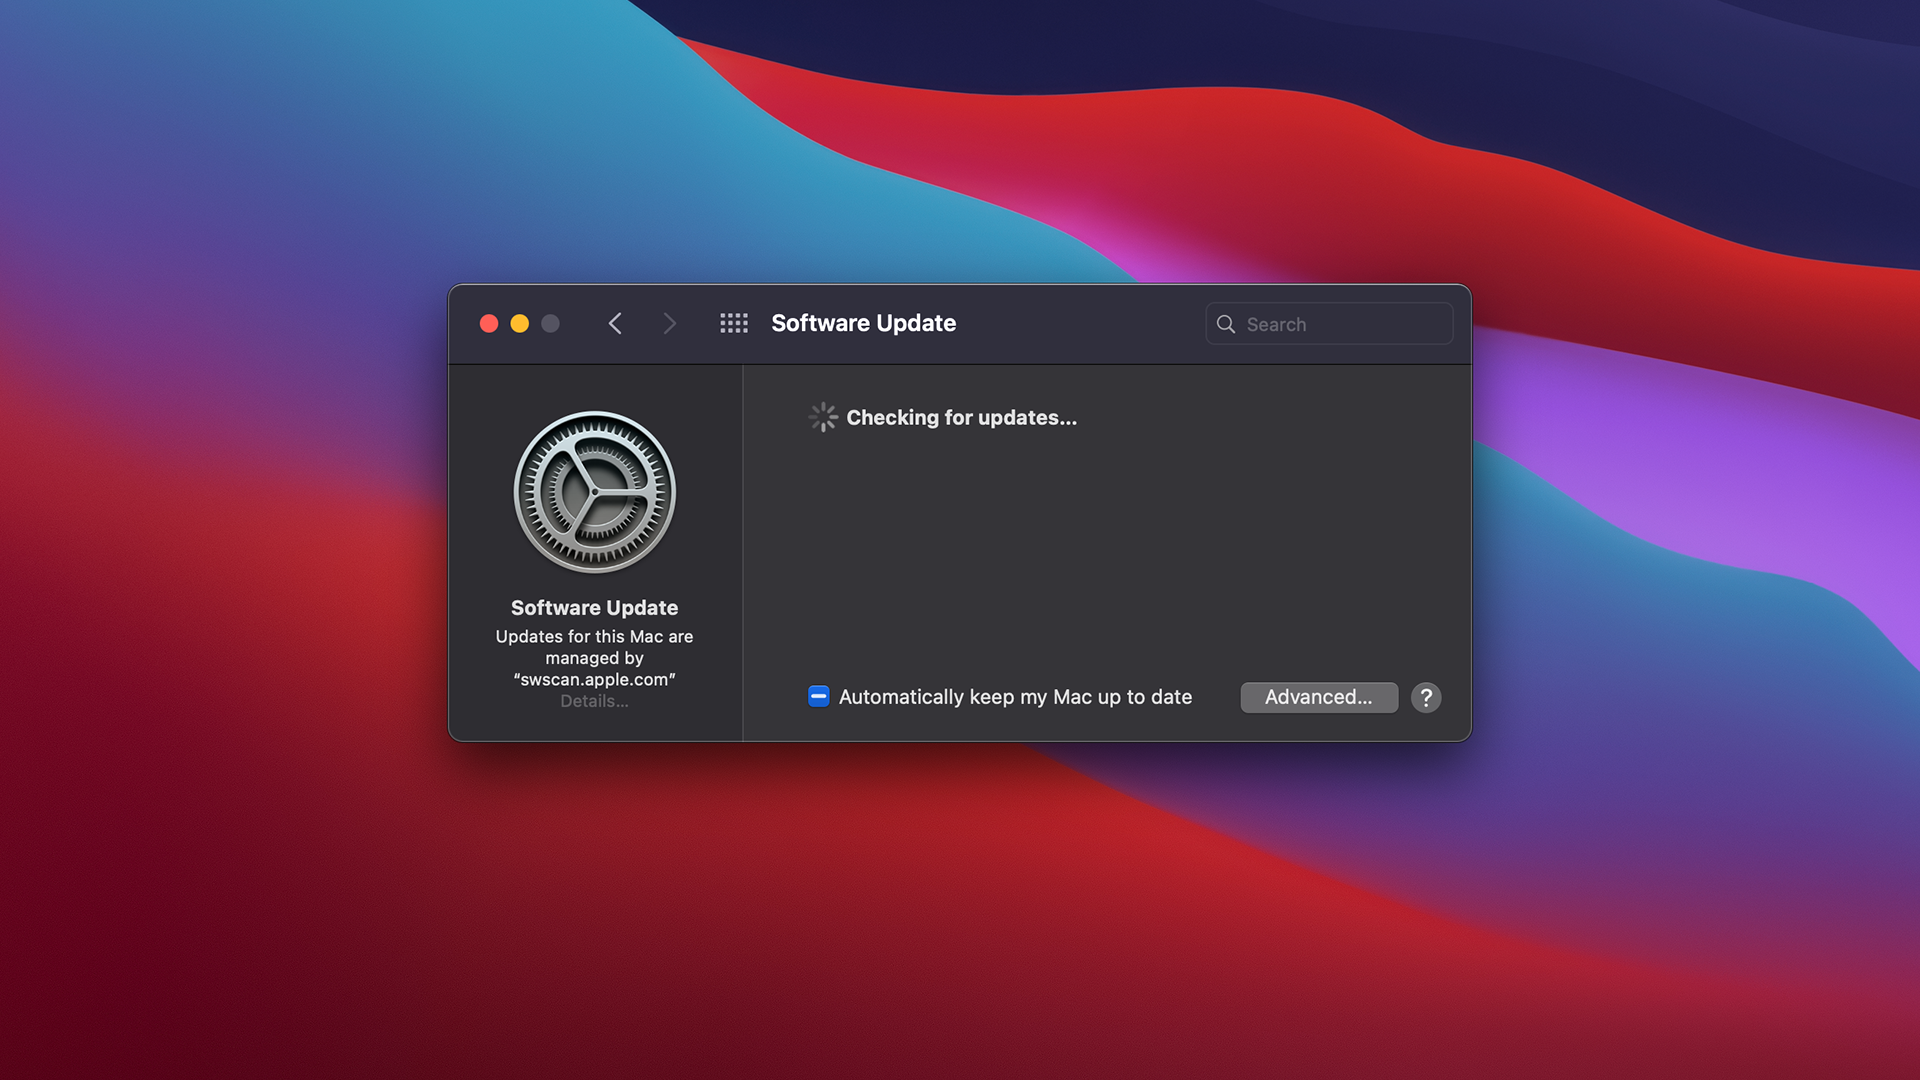 How to Update Software on Mac